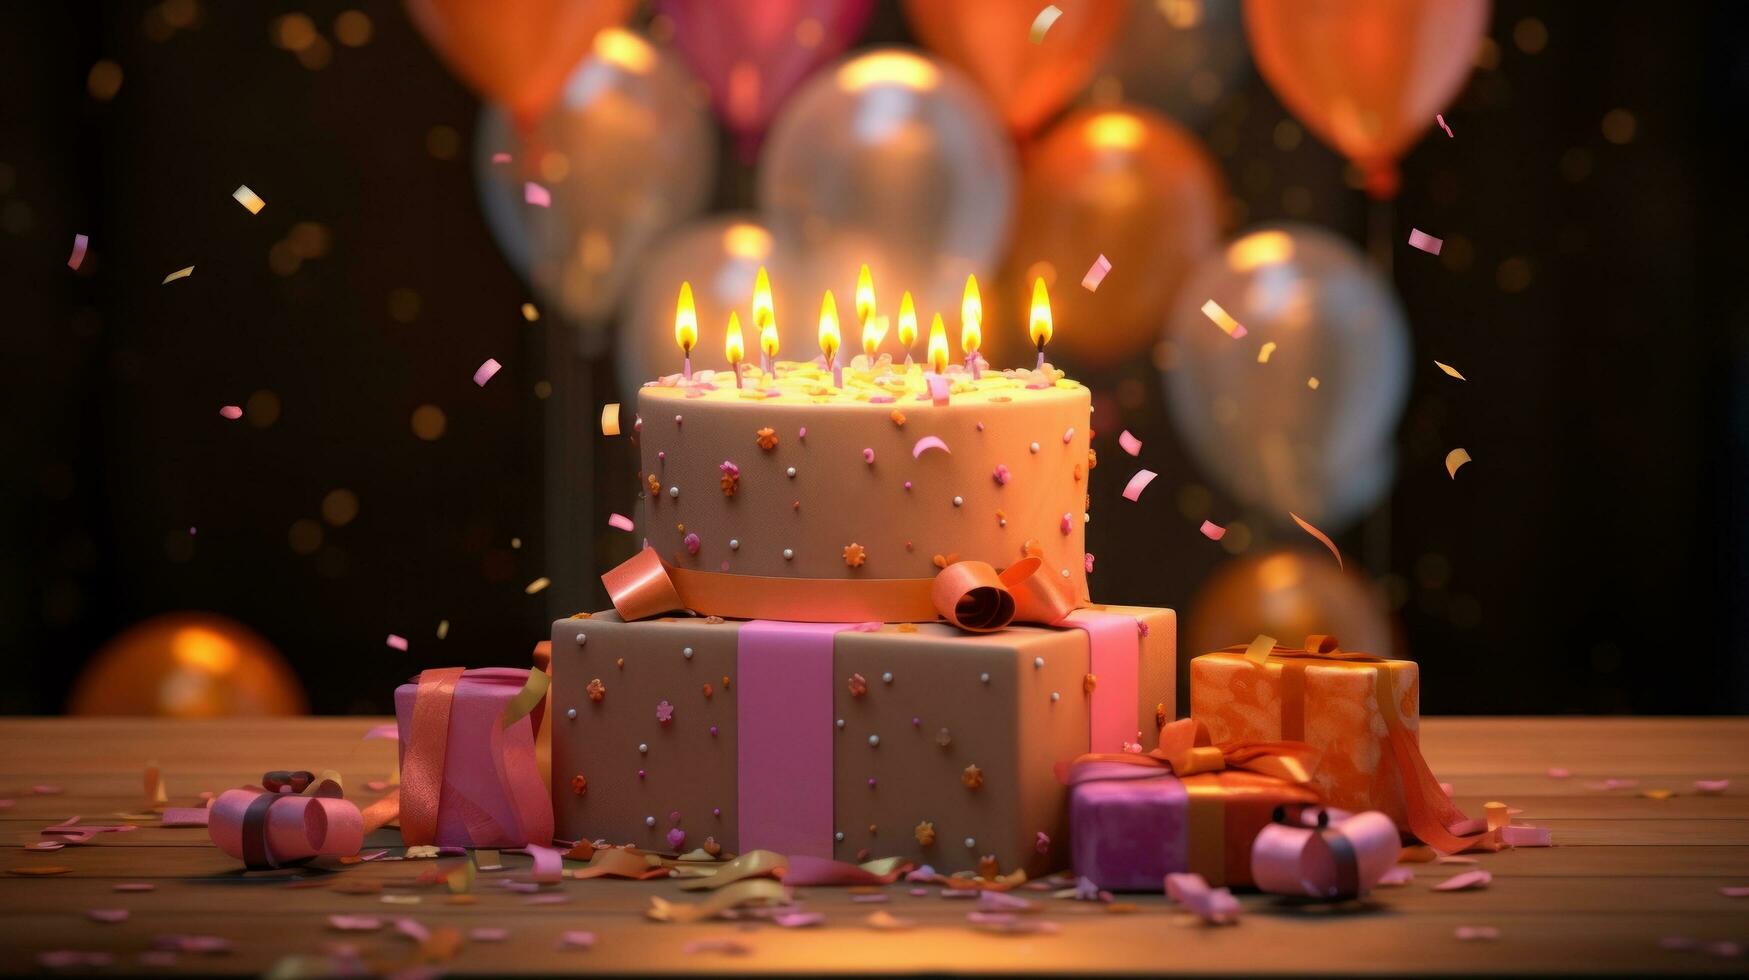 AI generated a birthday cake is displayed with lit candles on top photo